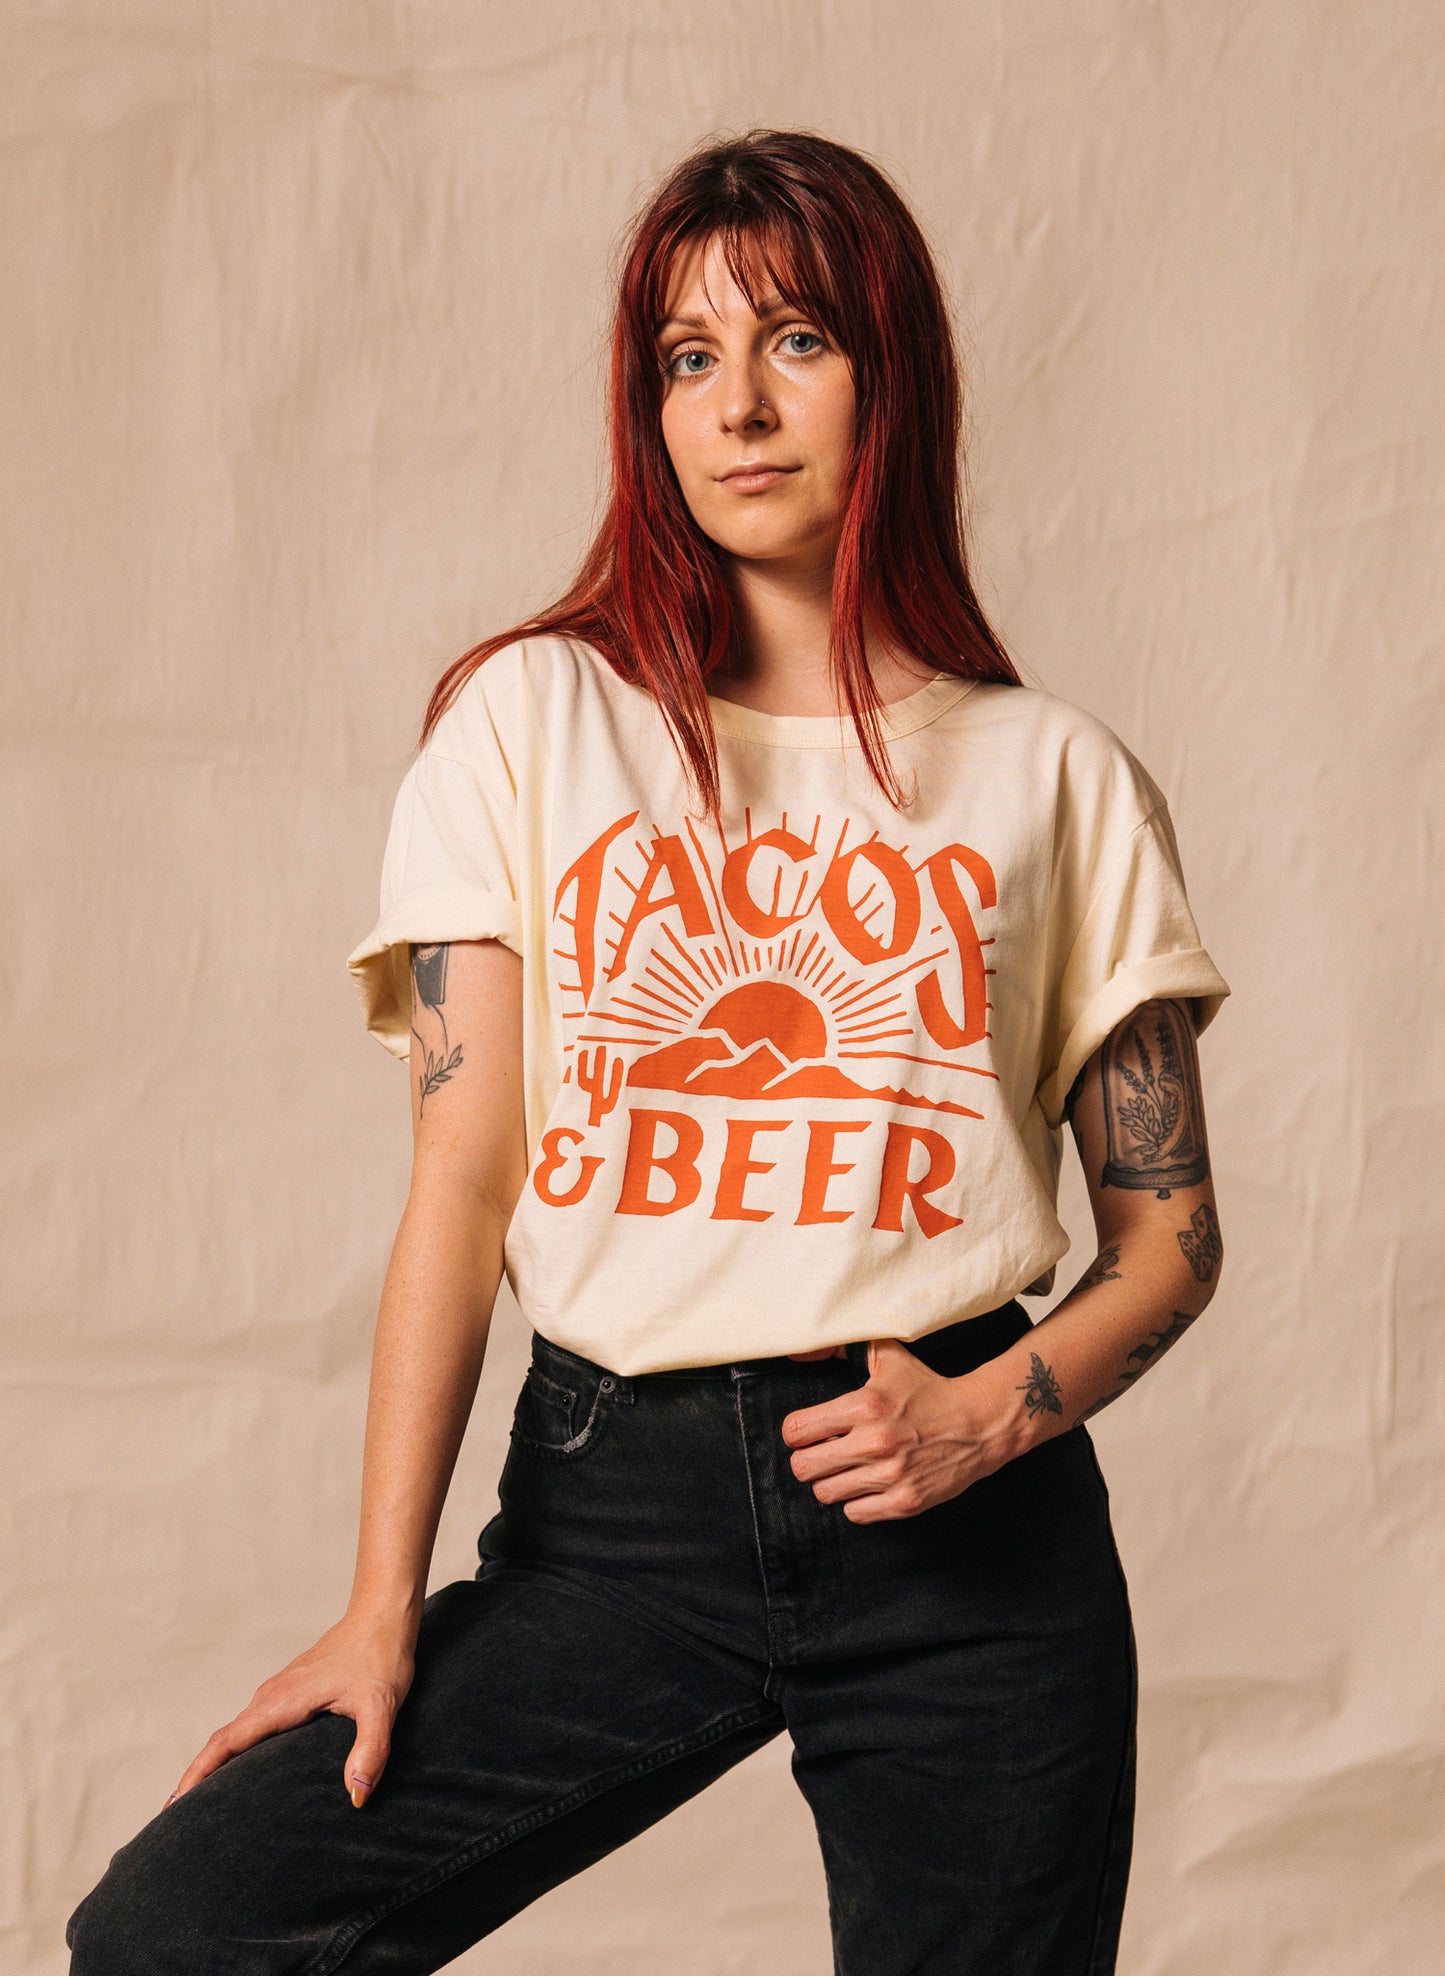 Tacos & Beer Desert Texas Mexican Food Taco Foodie T-shirt